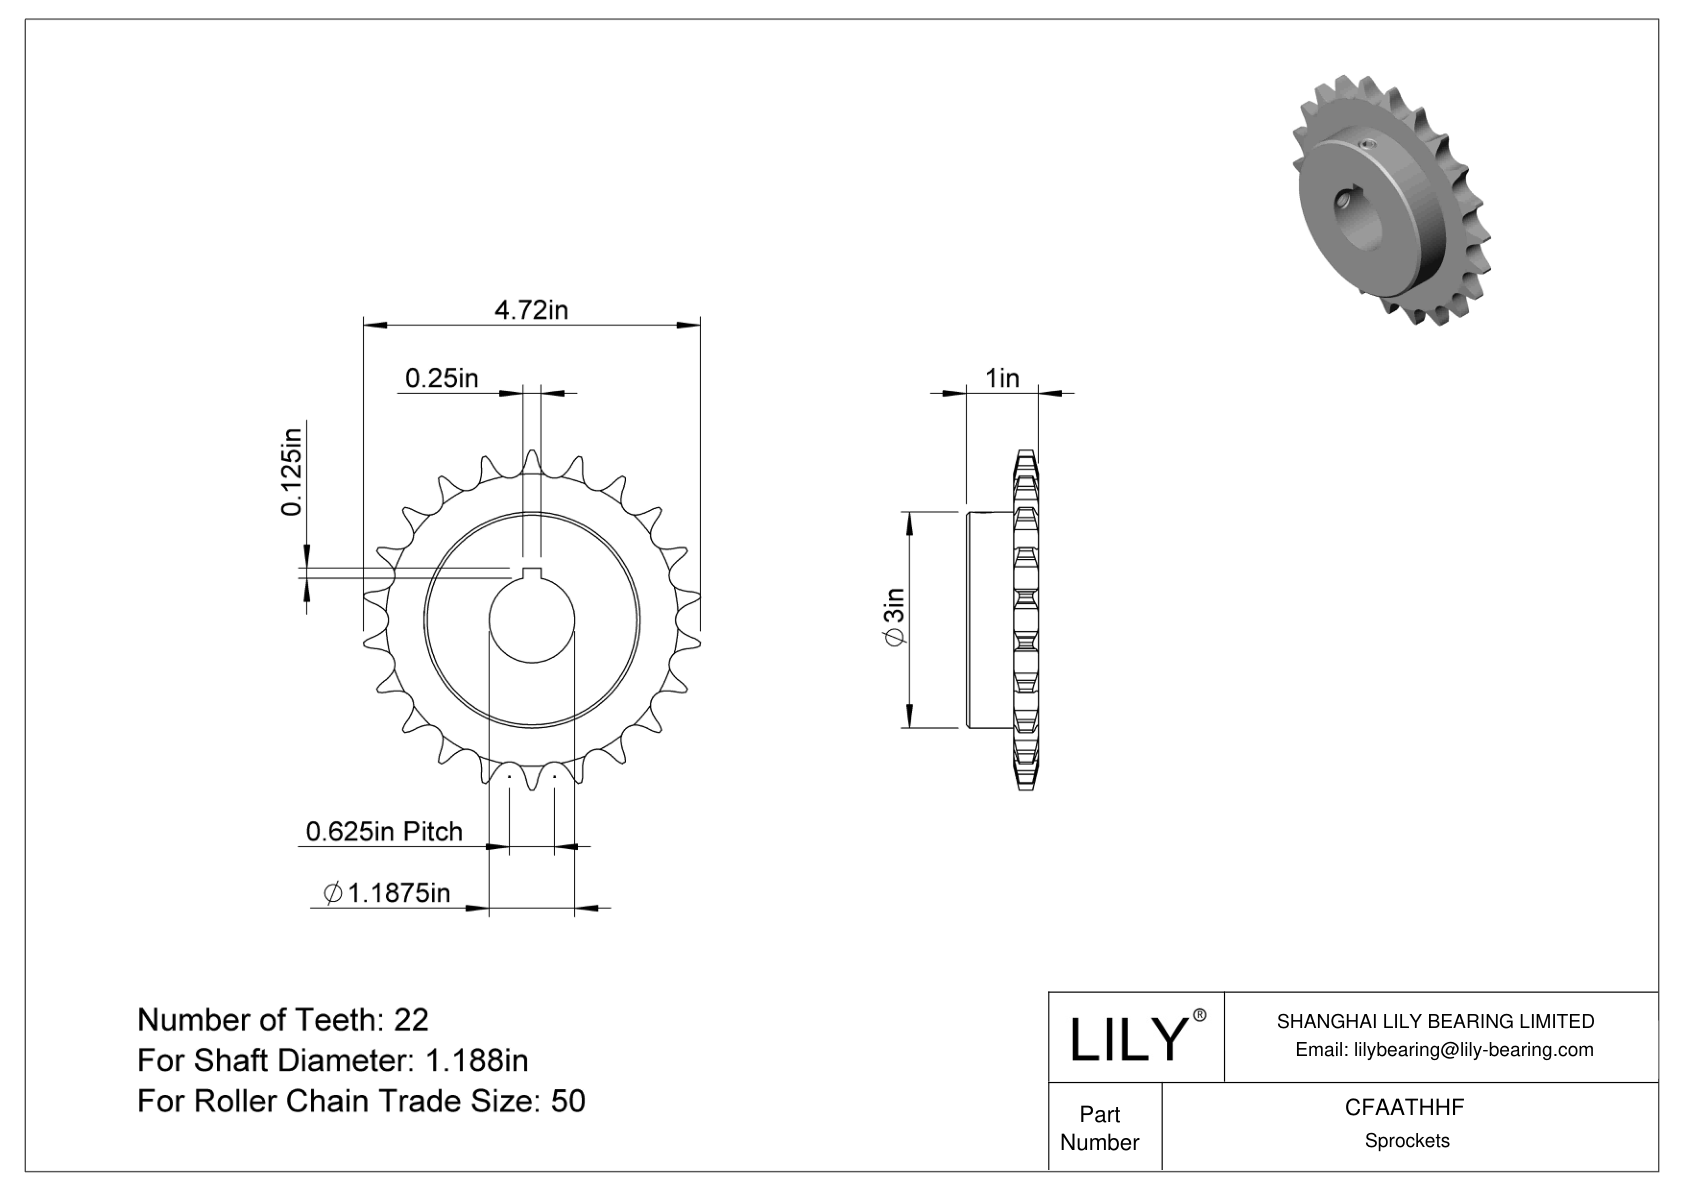 CFAATHHF Wear-Resistant Sprockets for ANSI Roller Chain cad drawing